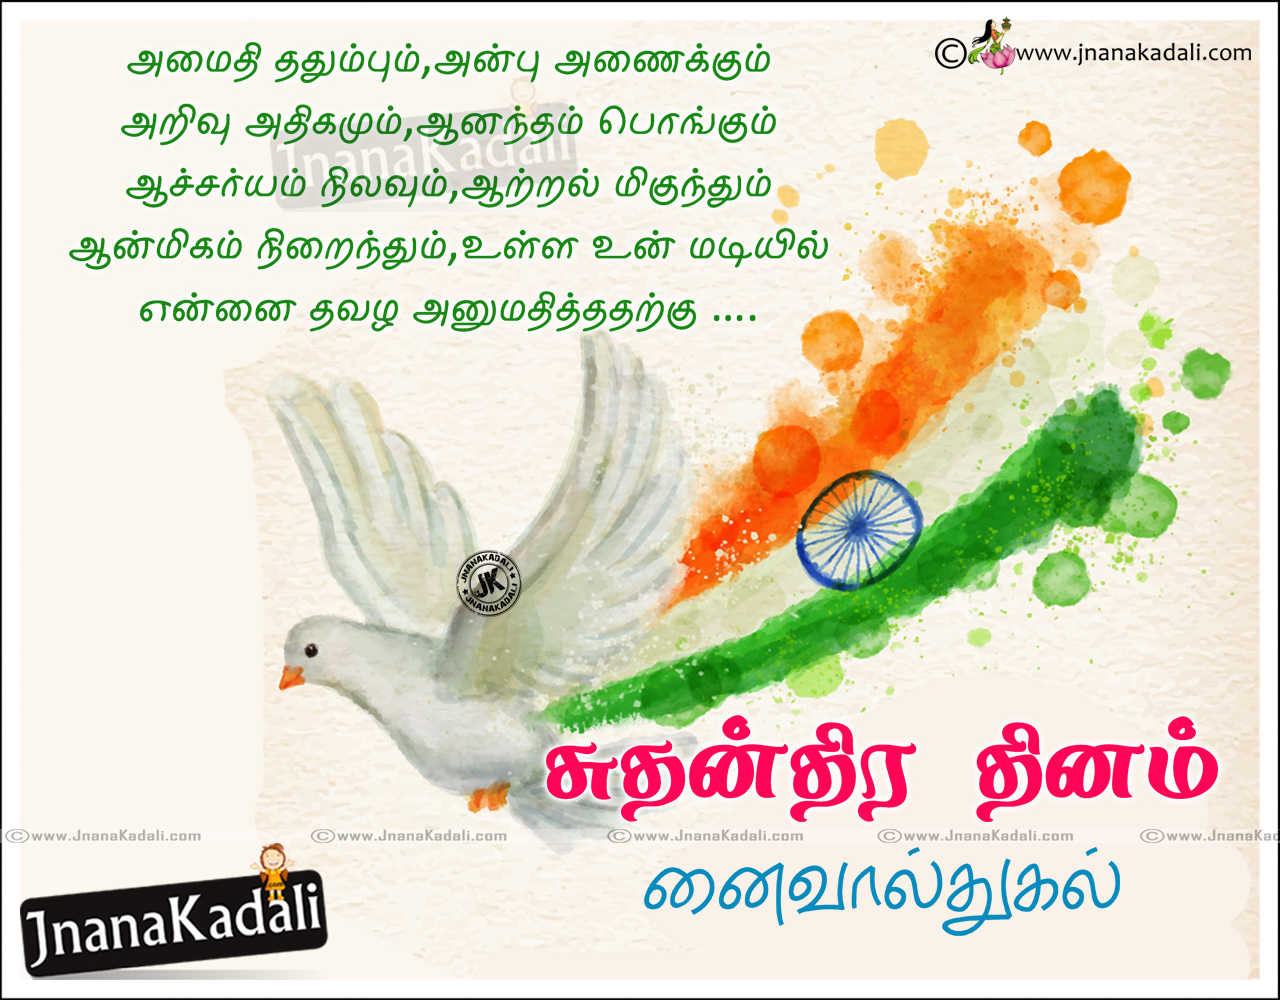 Independence Day Wishes Quotes Greetings in Tamil Latest Tamil ...